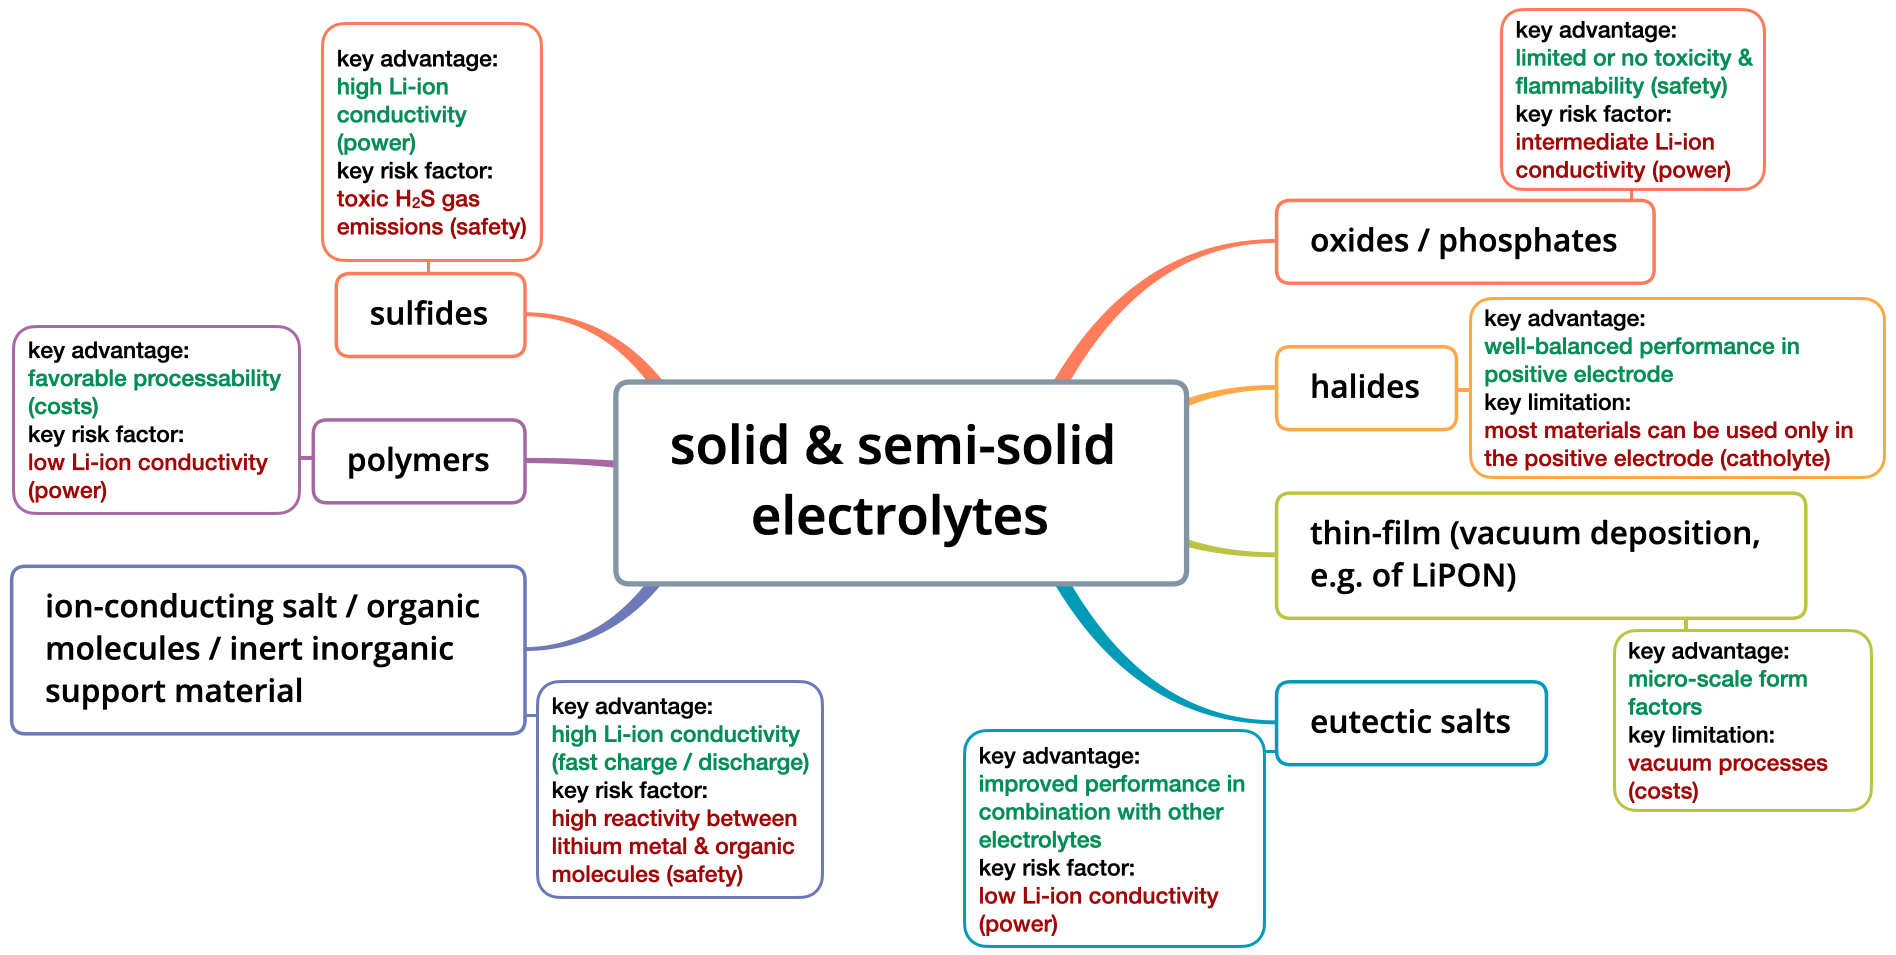 Advantages and Disadvantages of Various Solid & Semi-solid Electrolytes: 1) Sulfides; 2) Polymers; 3) Mixtures Between Ion-conducting Salts / Organic Molecules / Inert Inorganic Support Materials; 4) Oxides / Phosphates; 5) Halides; 6) Thin-film (Vacuum Deposition, e.g. of LiPON); 7) Eutectic Salts